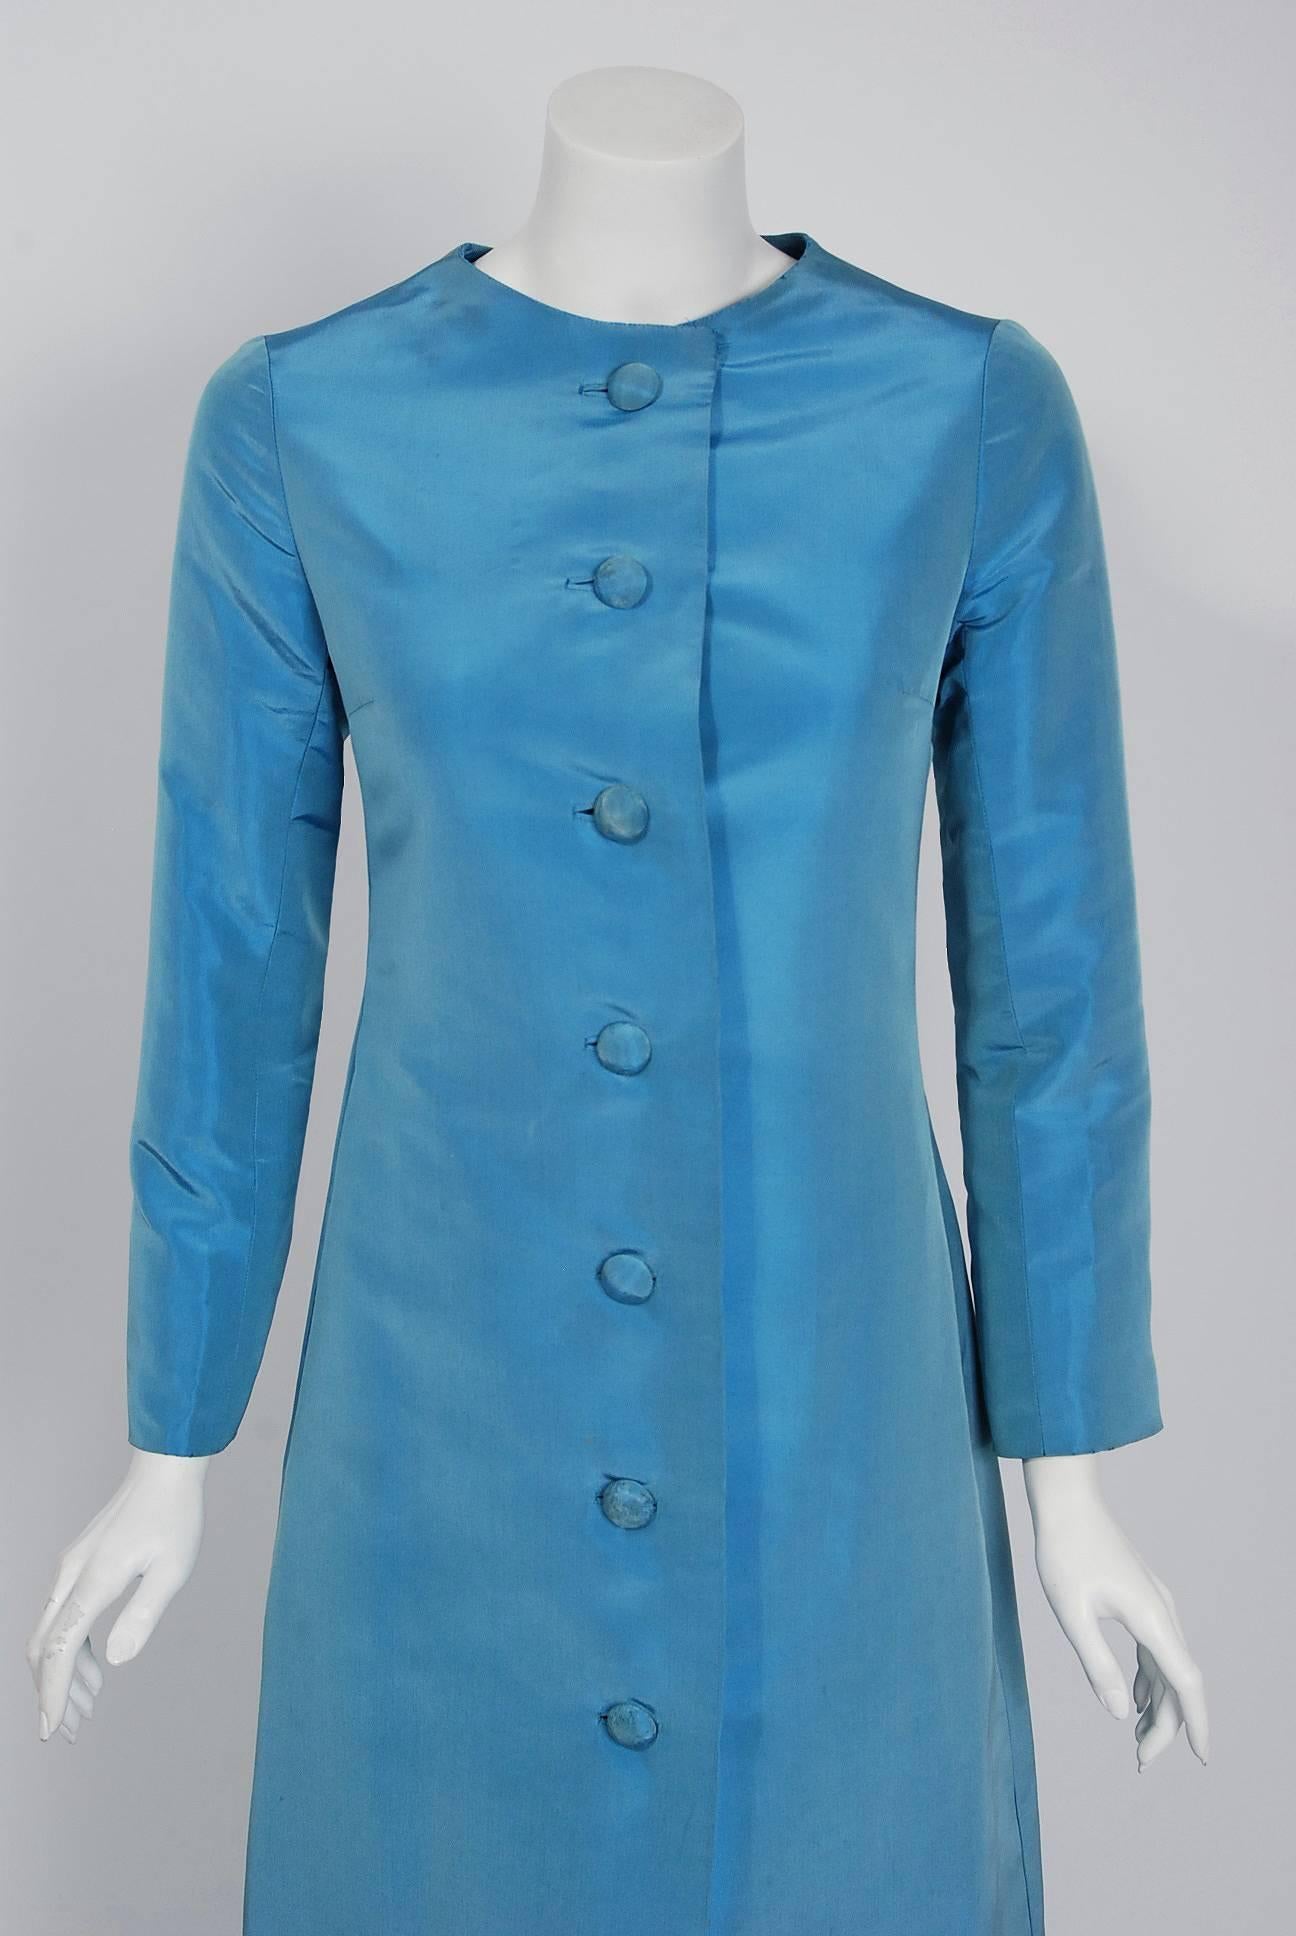 The House of Dior has been an enduring icon of Haute Couture. When the talented Marc Bohan took over as head designer in 1960, he continued the Dior tradition of elegant design. This beautiful full-length sculpted coat is a perfect example of his